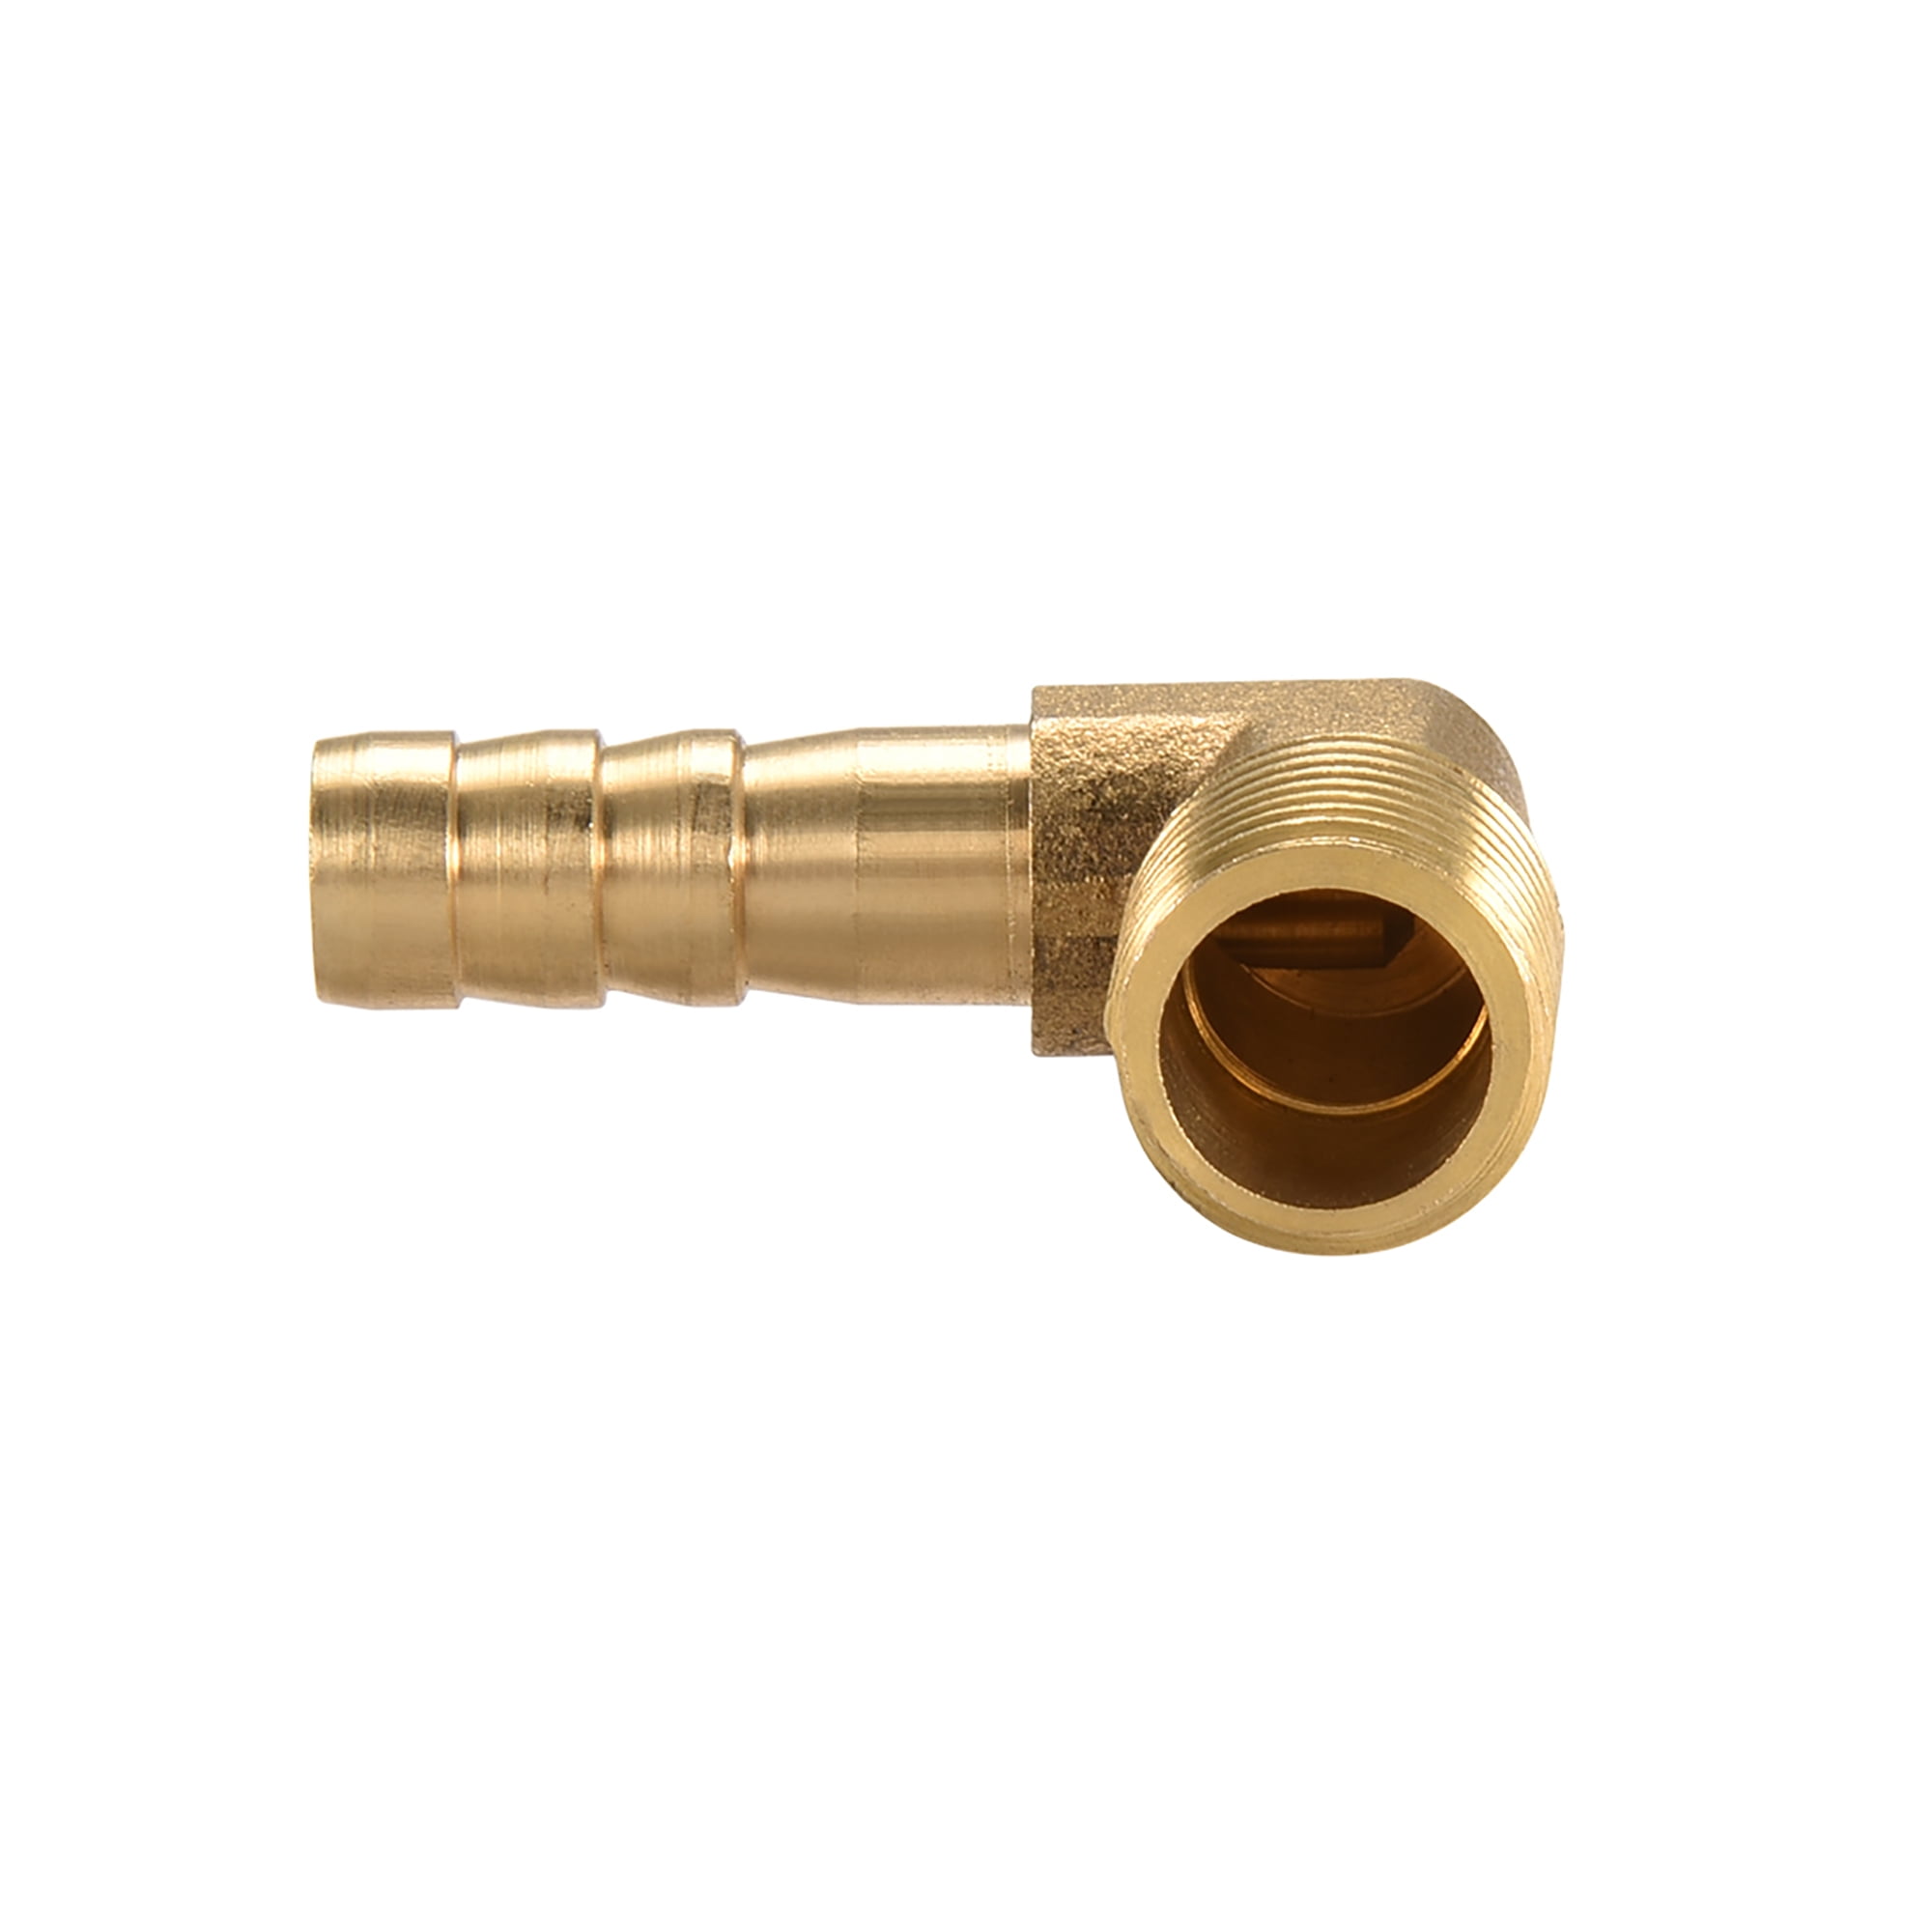 Brass Barb Hose Fitting 90 Degree Elbow 8mm Barbed x 1/4 PT Male Thread 2pcs 